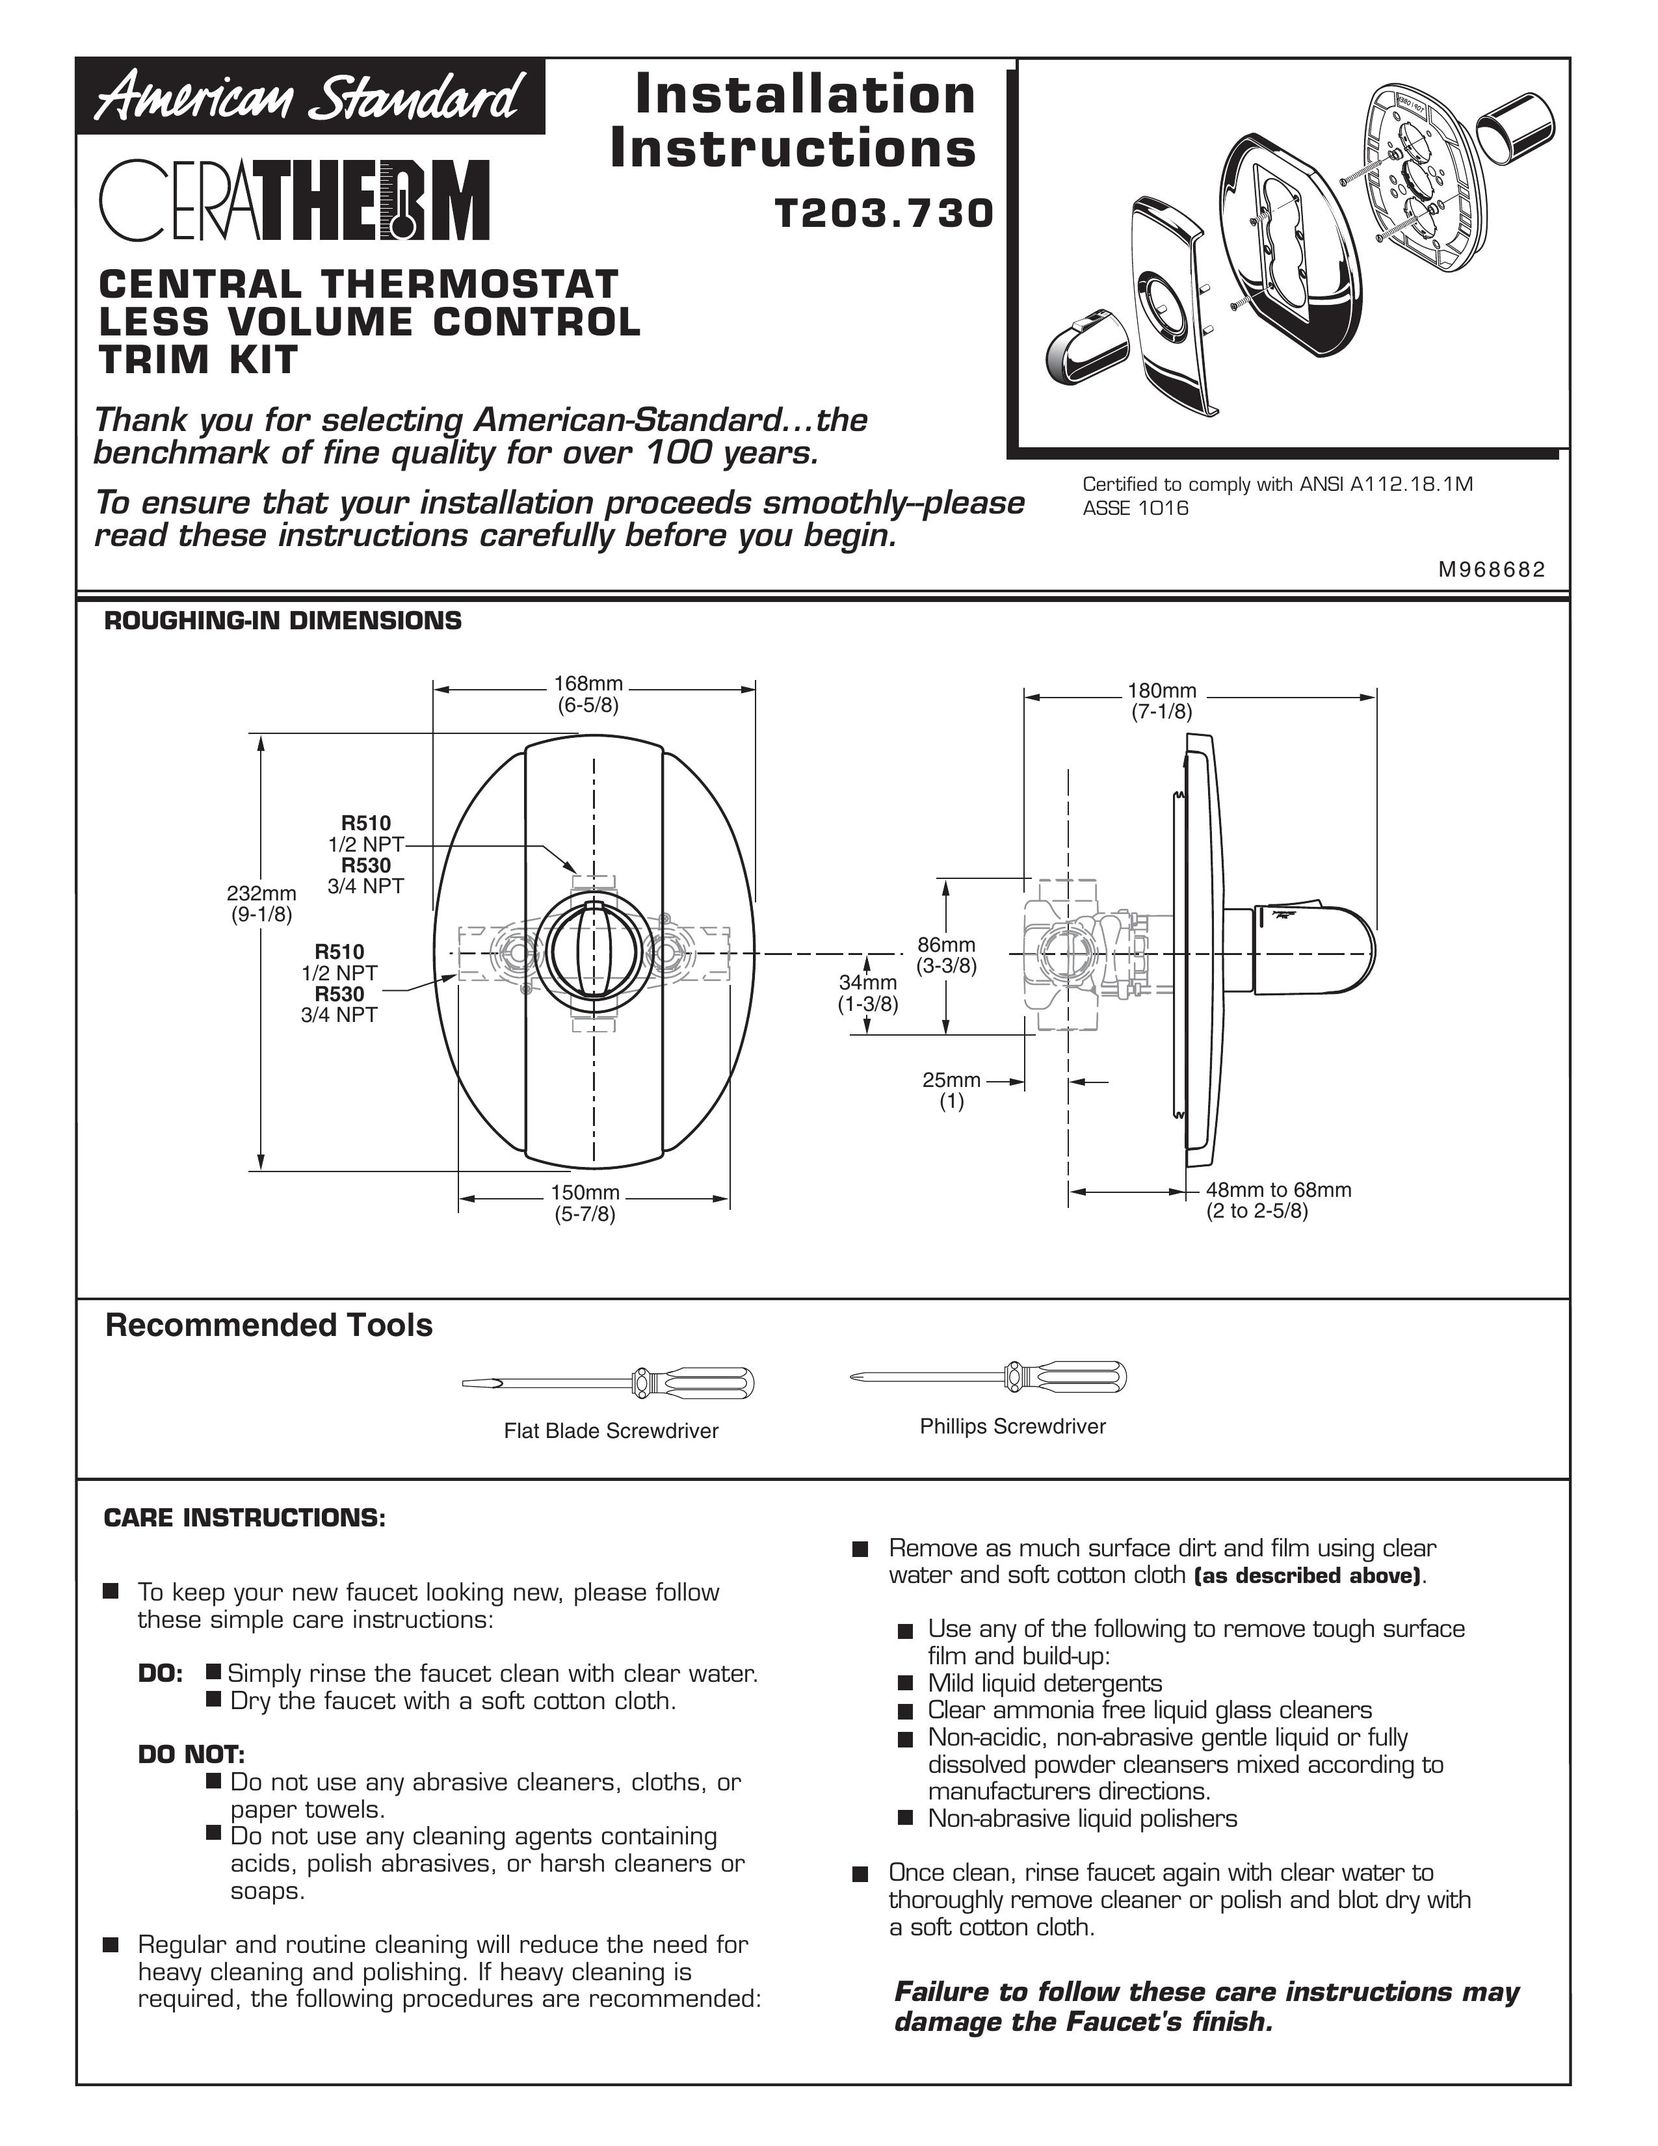 American Standard T203.730 Thermostat User Manual